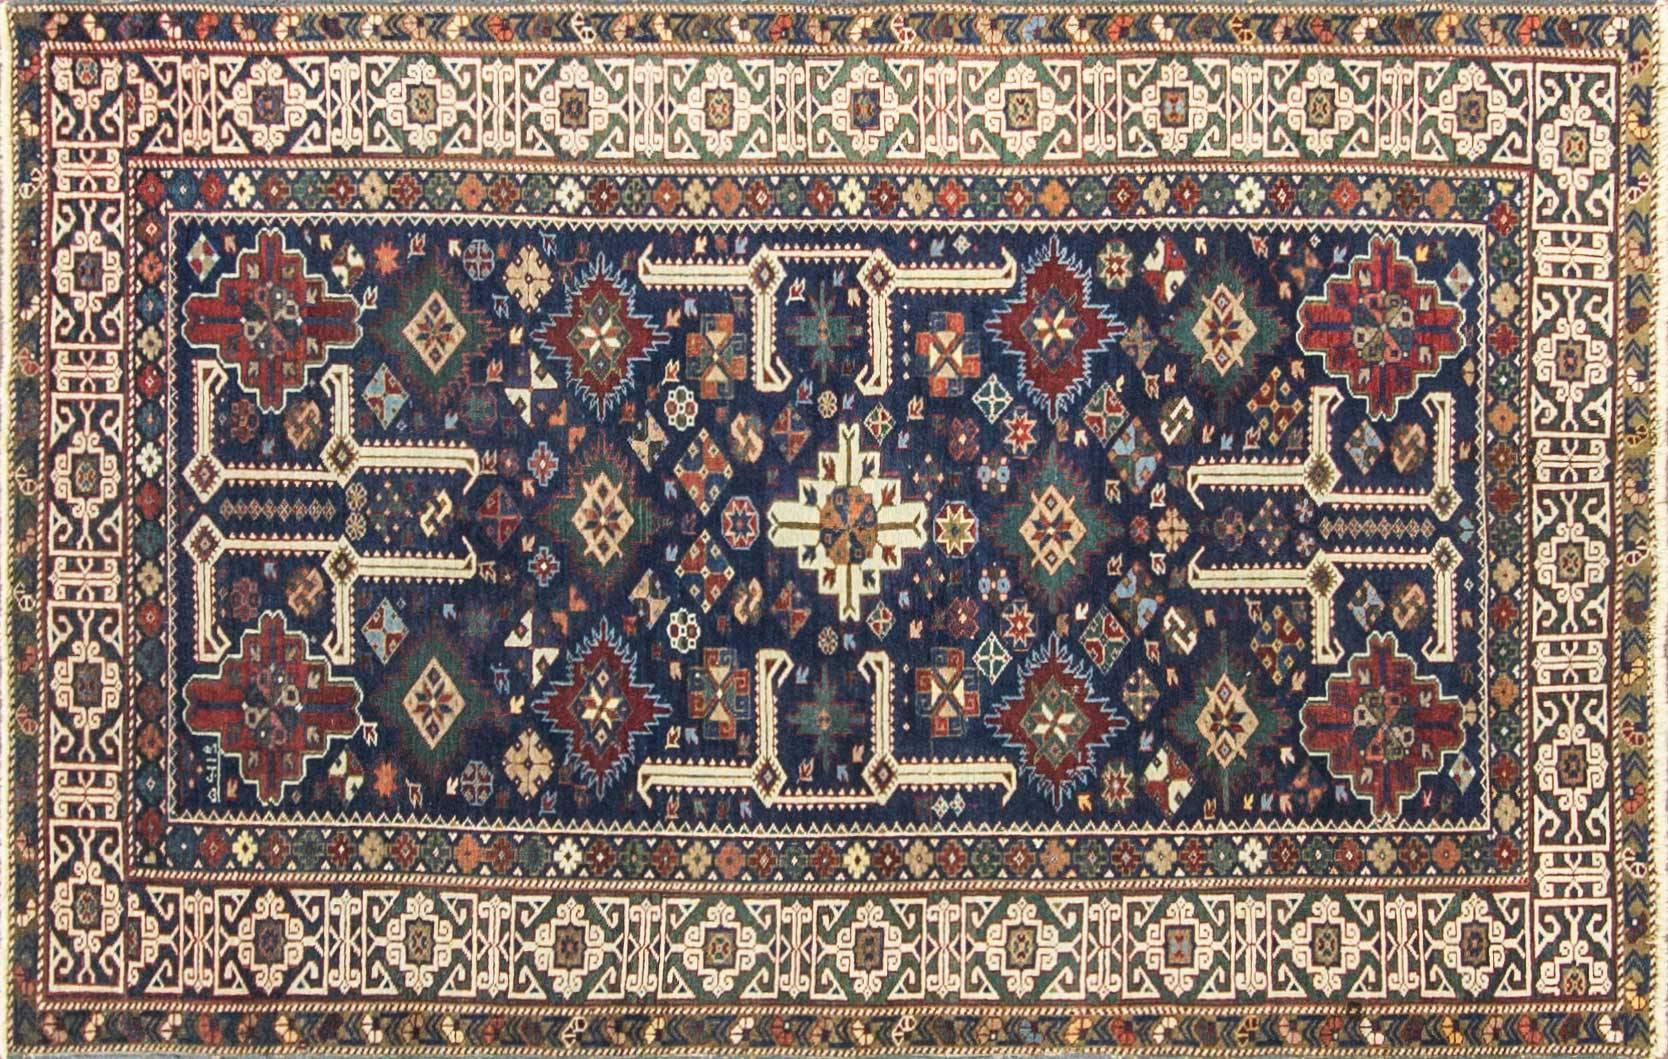 Historic Khanate or administrative district populated by the Lezghi people and Azeri Turks. Located in present-day Azerbaijan, the city of Kuba produced some of the most distinctive and finely executed Caucasian rugs. They are beautifully and richly